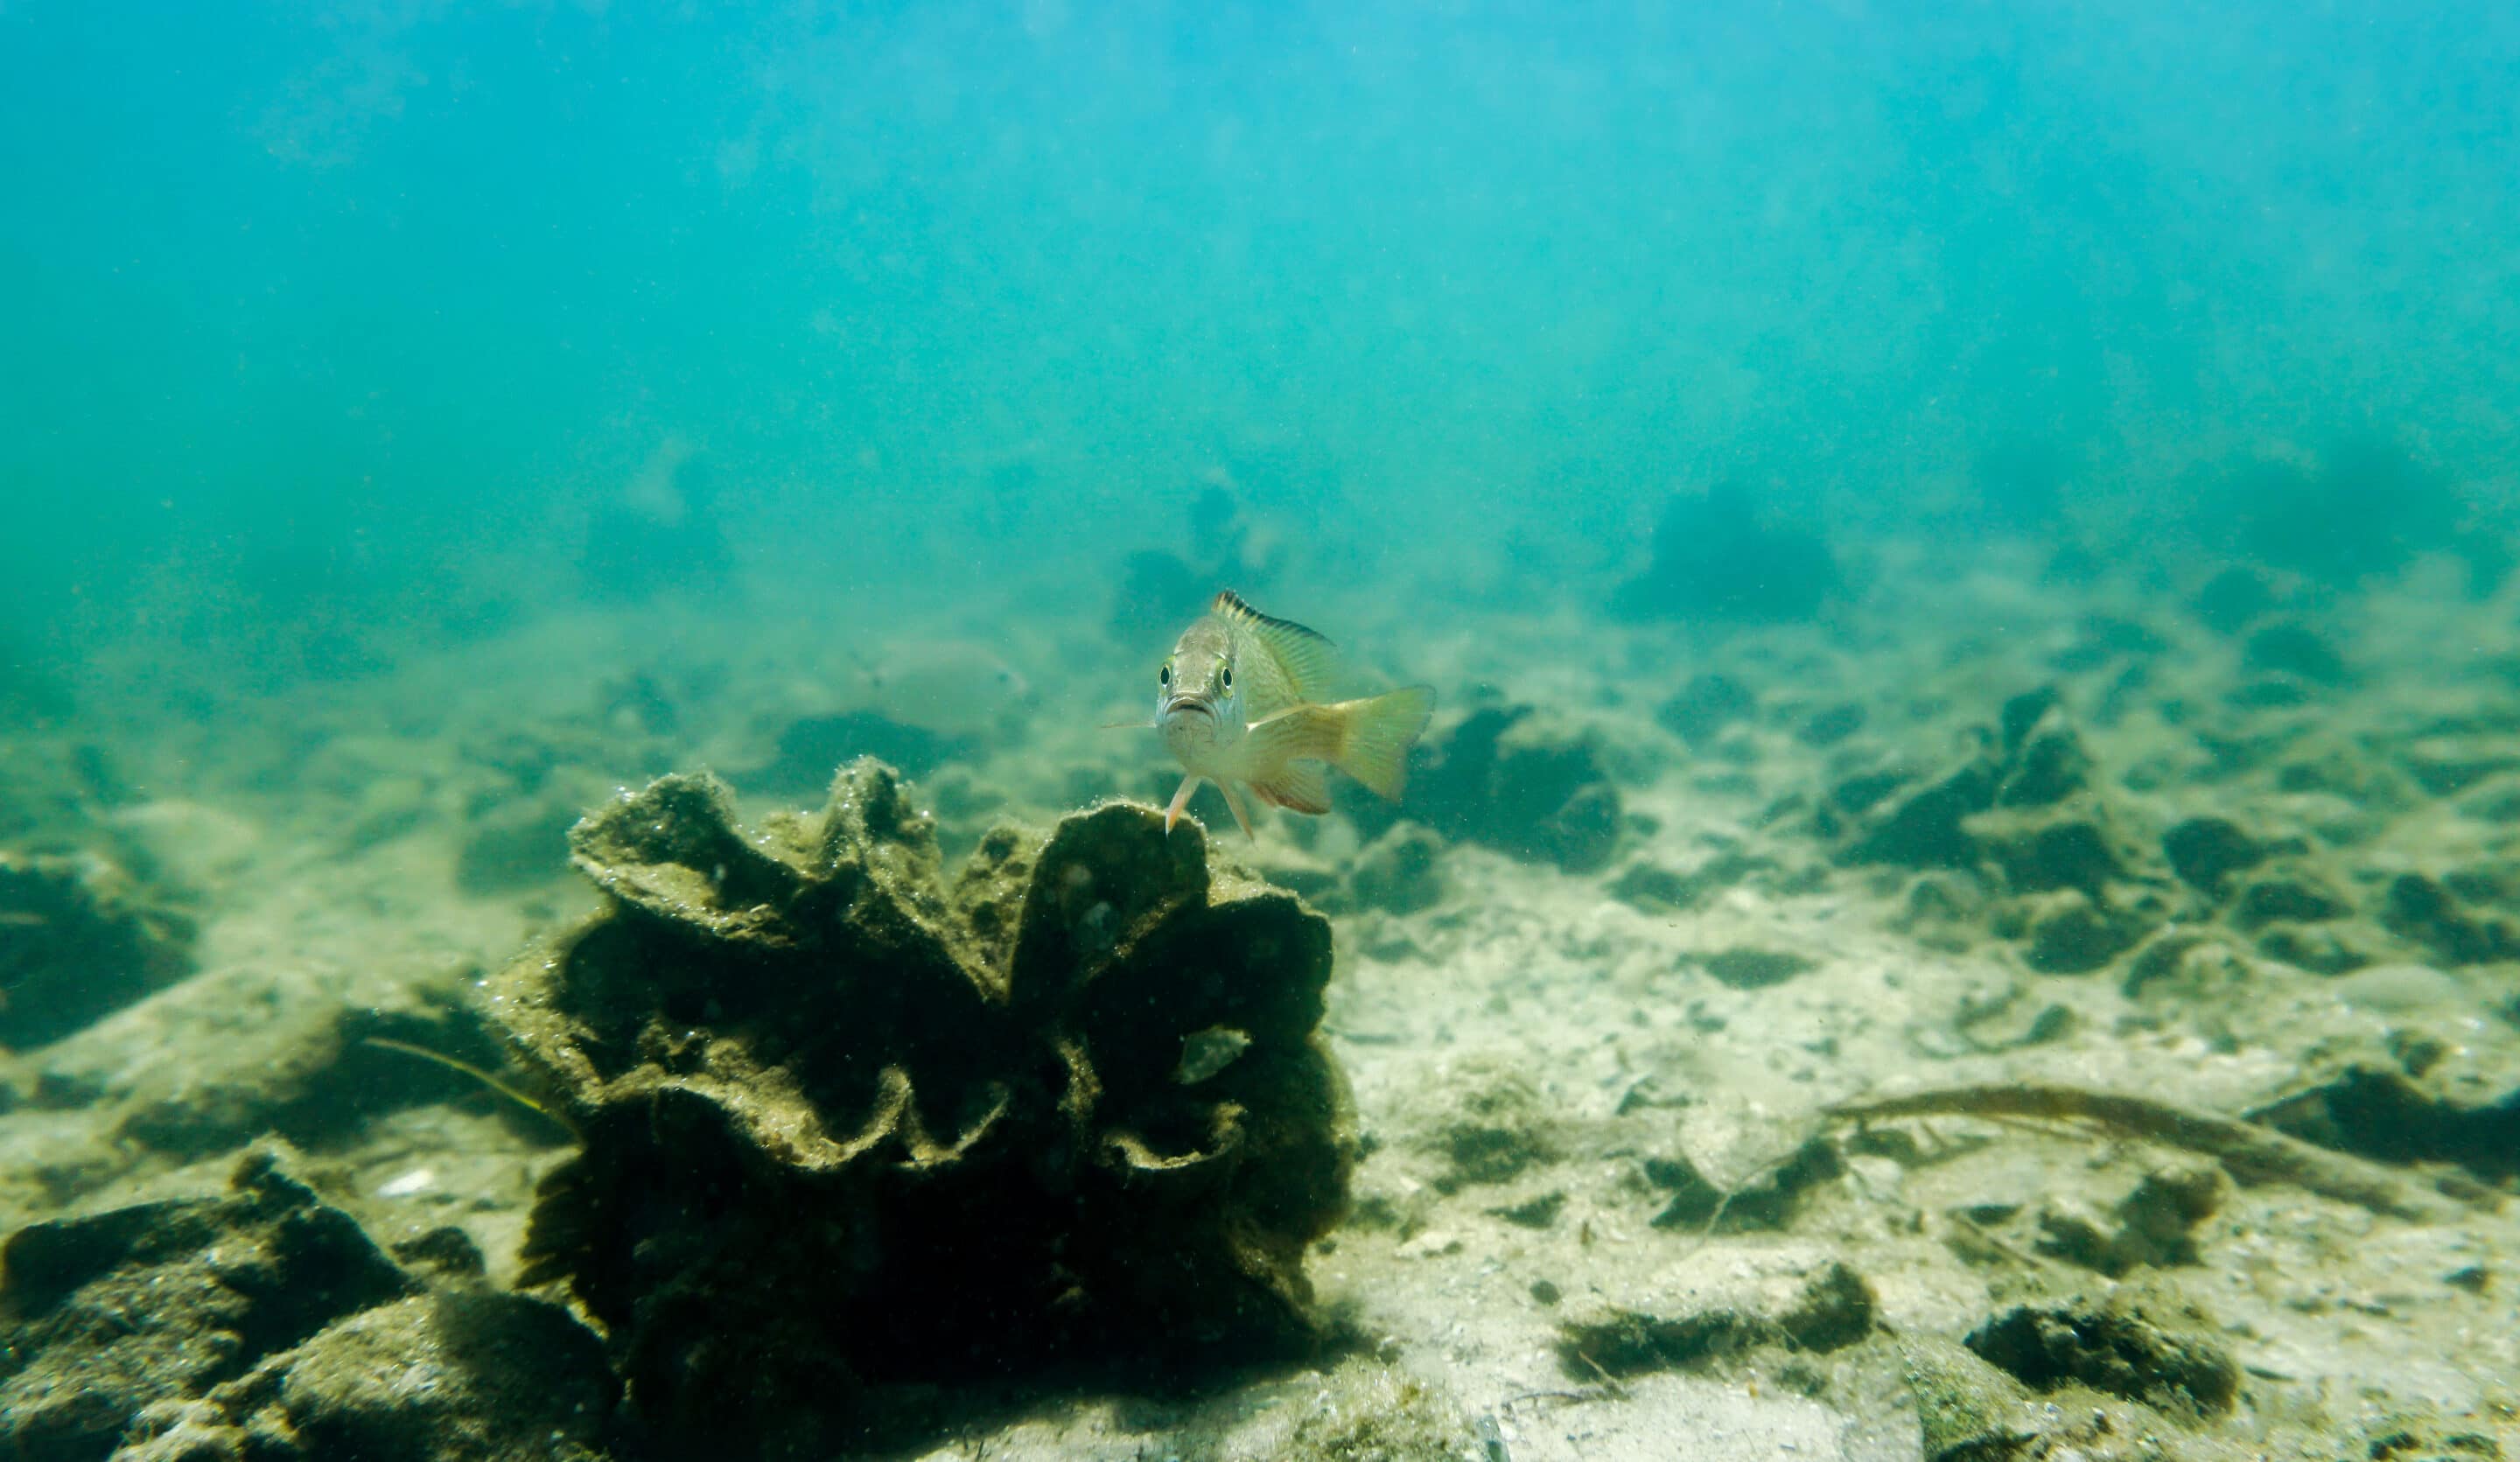 A small fish stares at the camera underwater, surrounded by oysters.